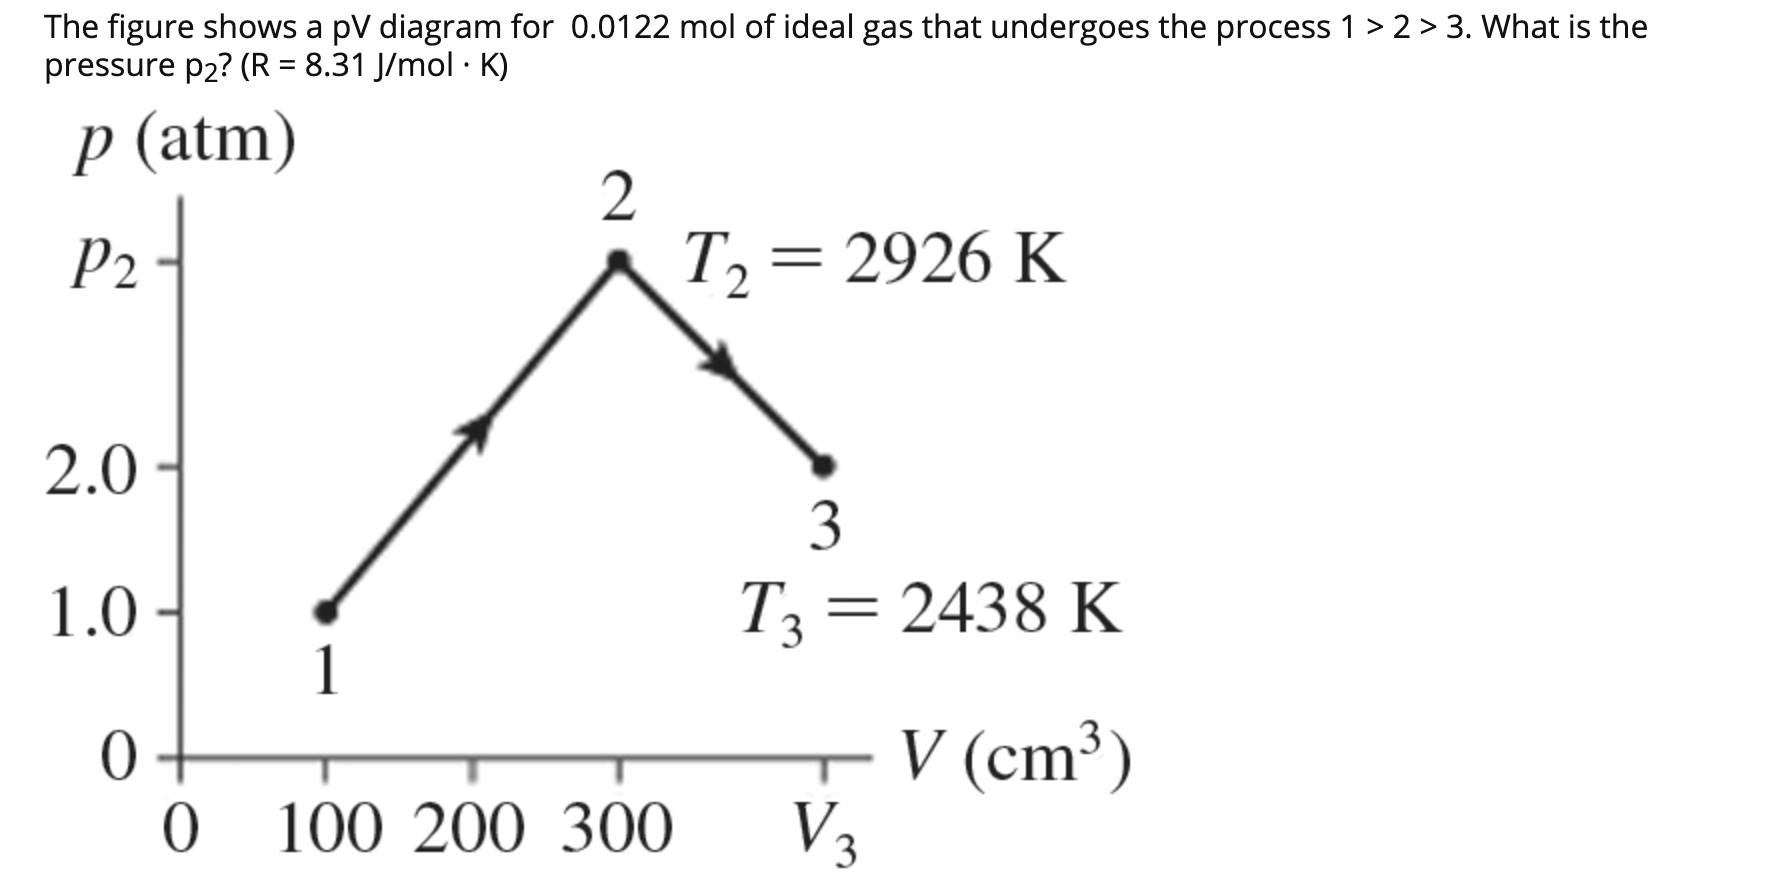 Solved The Figure Shows A Pv Diagram For 5 2 G Of Ideal M Chegg Com